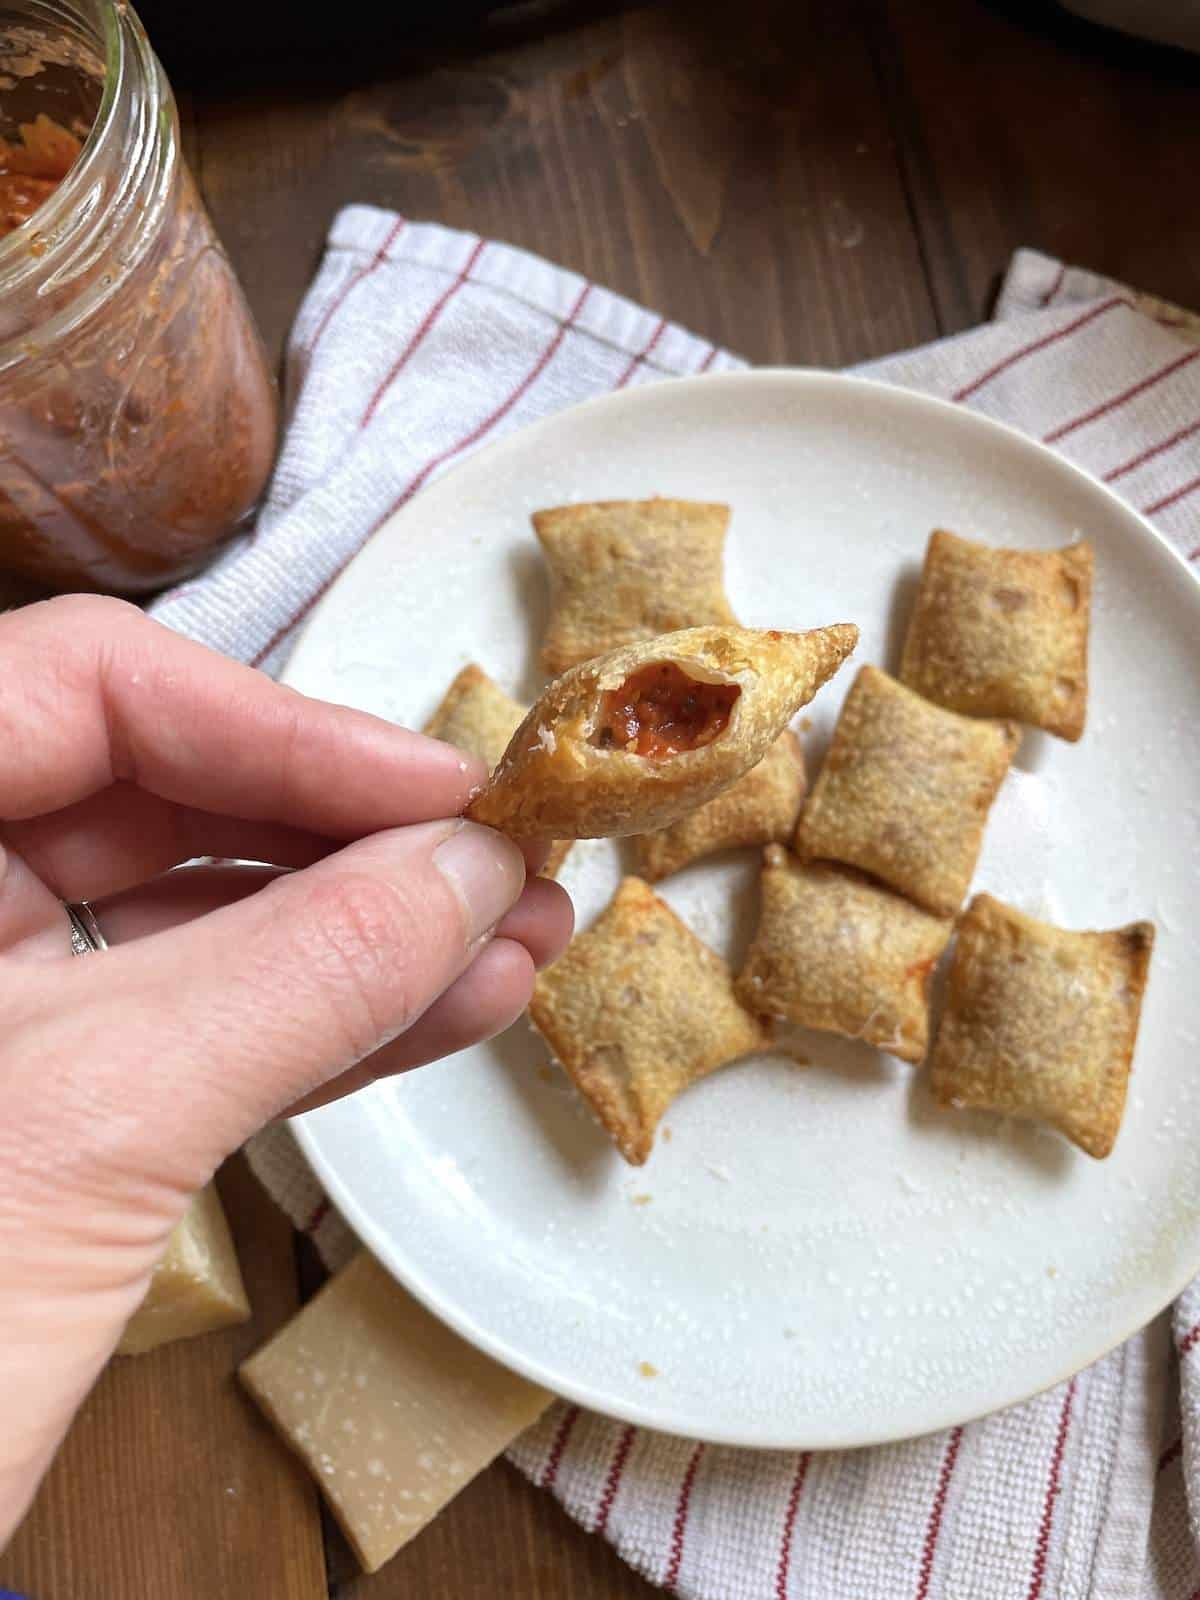 An air fried pizza roll bit open showing the inside over a plate of pizza bites.